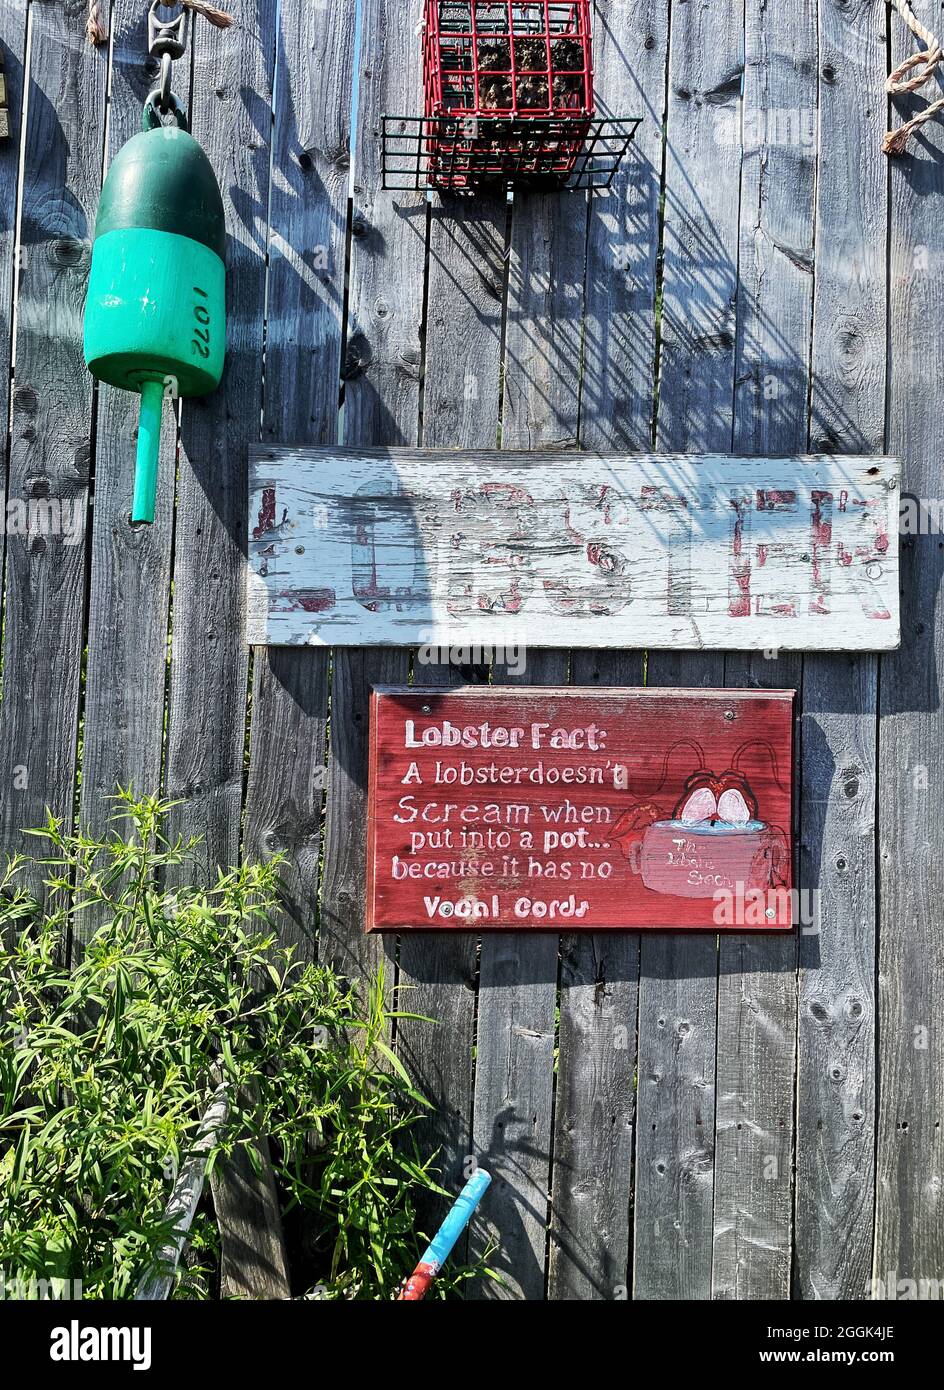 Old, weathered wooden fence with signs & buoys at Perry’s Lobster Shack is a Low-key waterside shack offering lobster & seafood plates. Stock Photo